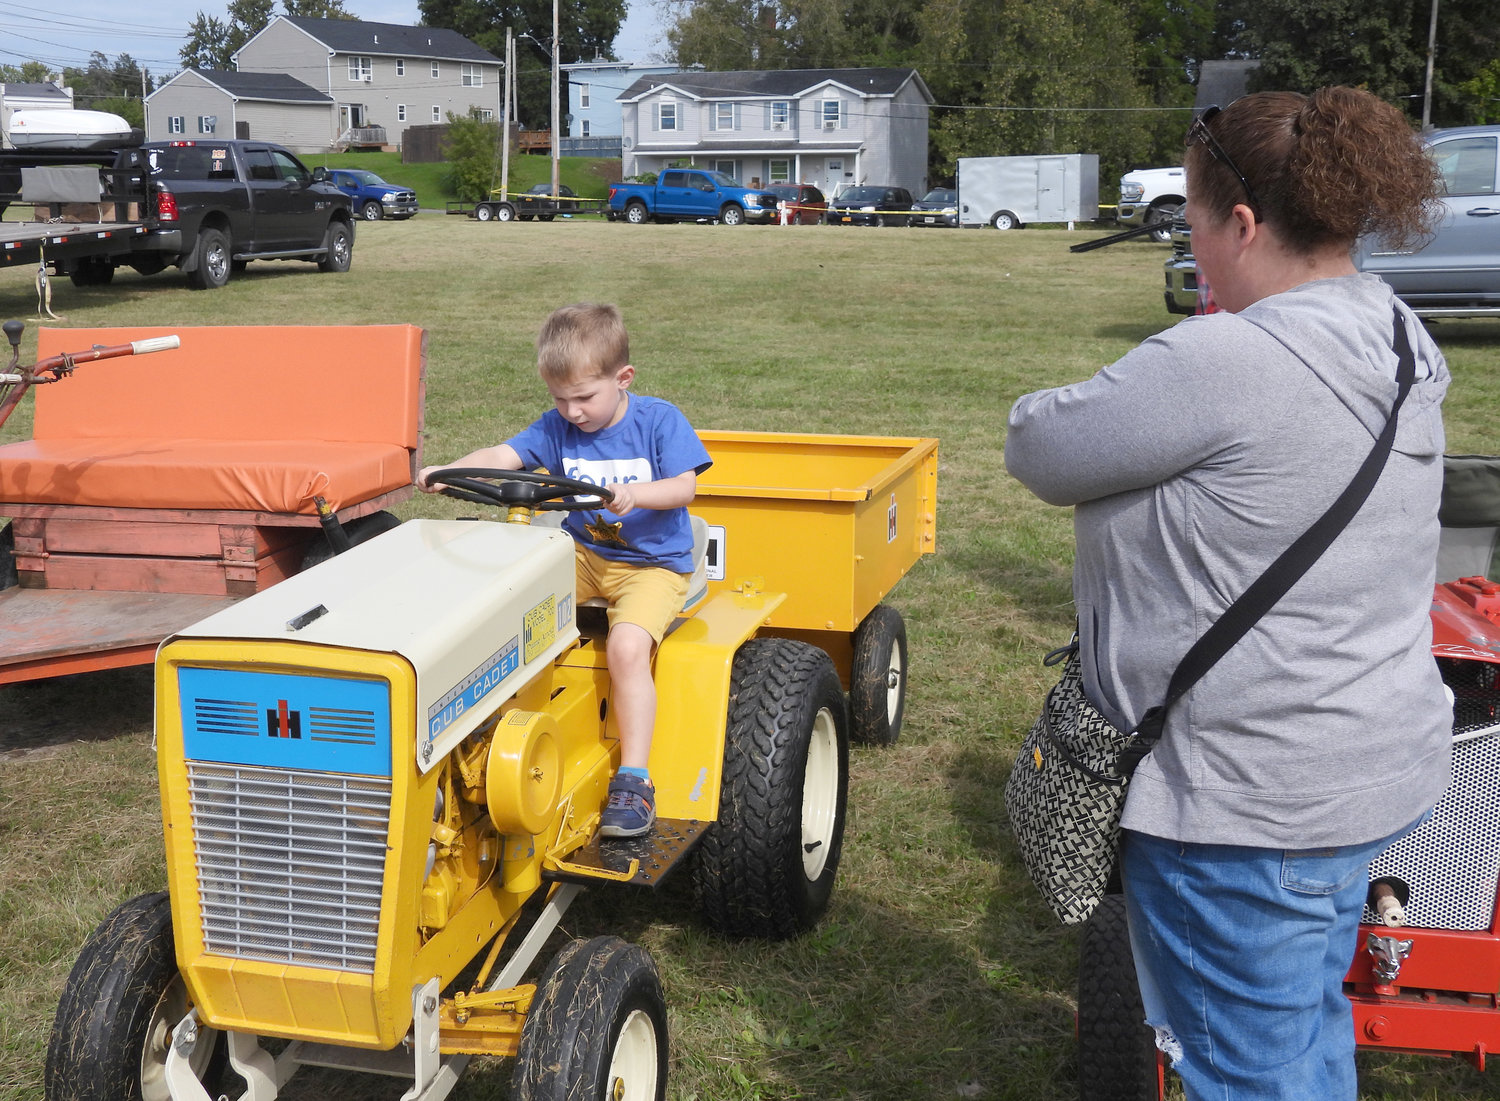 Chittenango resident Trish Leonard watches her nephew Grant Lois have fun on an old-fashioned tractor at last year's Fall Fest in Oneida.